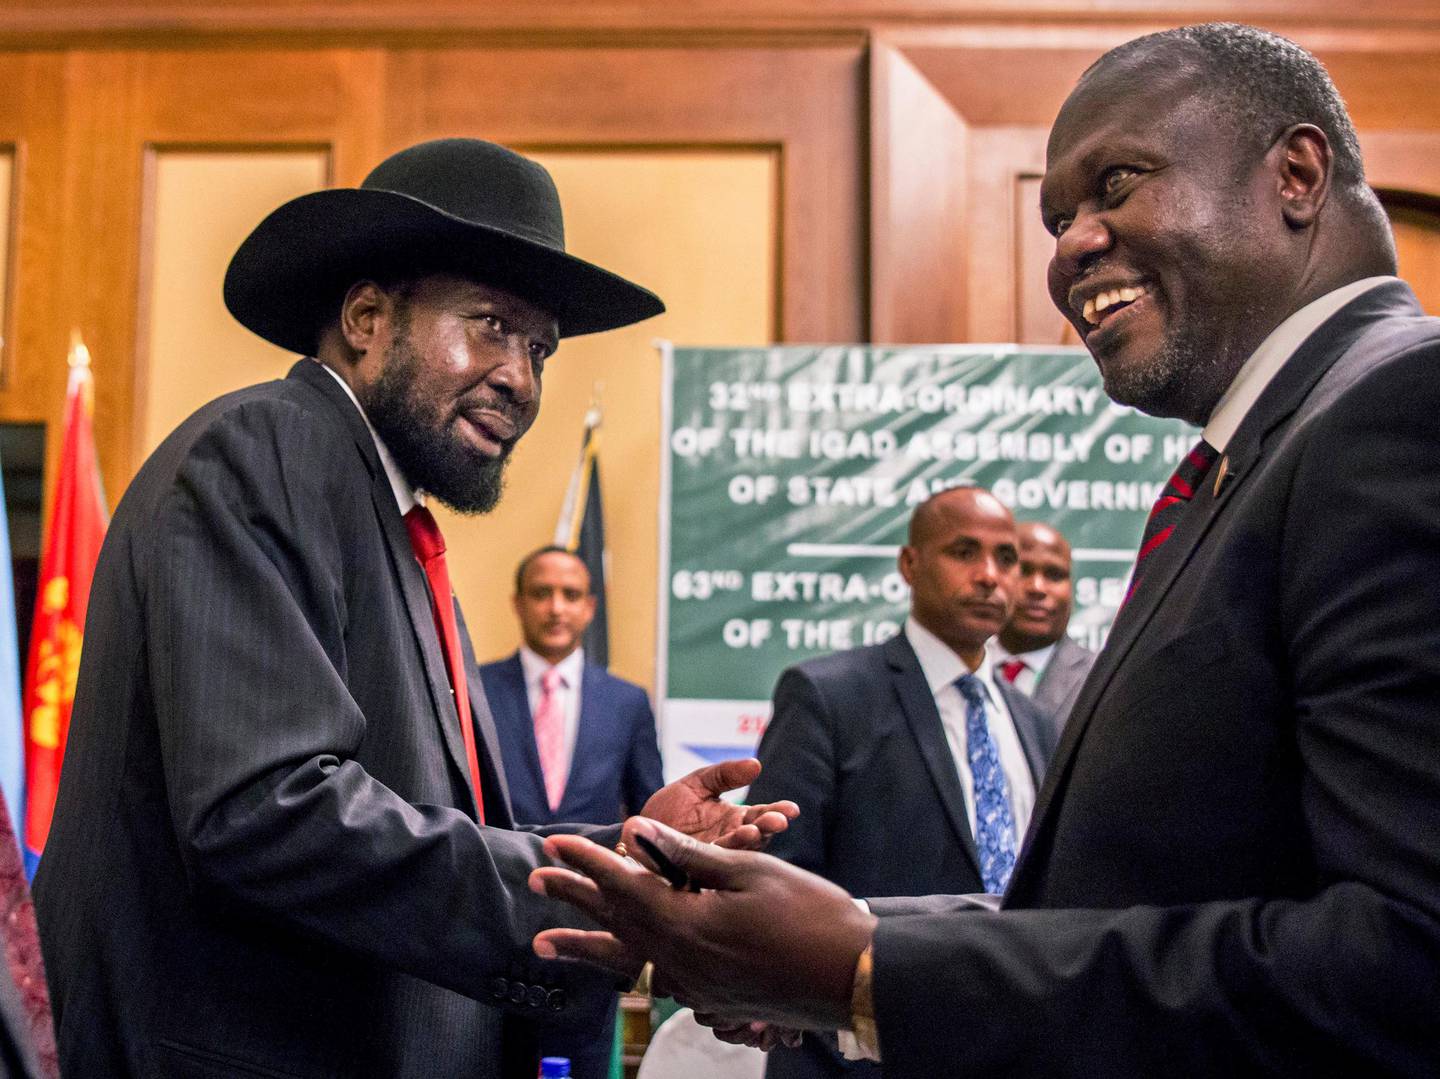 FILE - In this Thursday, June 21, 2018 file photo, South Sudan's President Salva Kiir, left, and opposition leader Riek Machar shake hands during peace talks in Addis Ababa, Ethiopia. South Sudan's committee overseeing the fragile transition from civil war has approved almost $185 million in spending on vehicles, food and home renovations while the country's peace deal suffers from an alleged lack of funds, according to internal documents seen by The Associated Press. (AP Photo/Mulugeta Ayene, File)